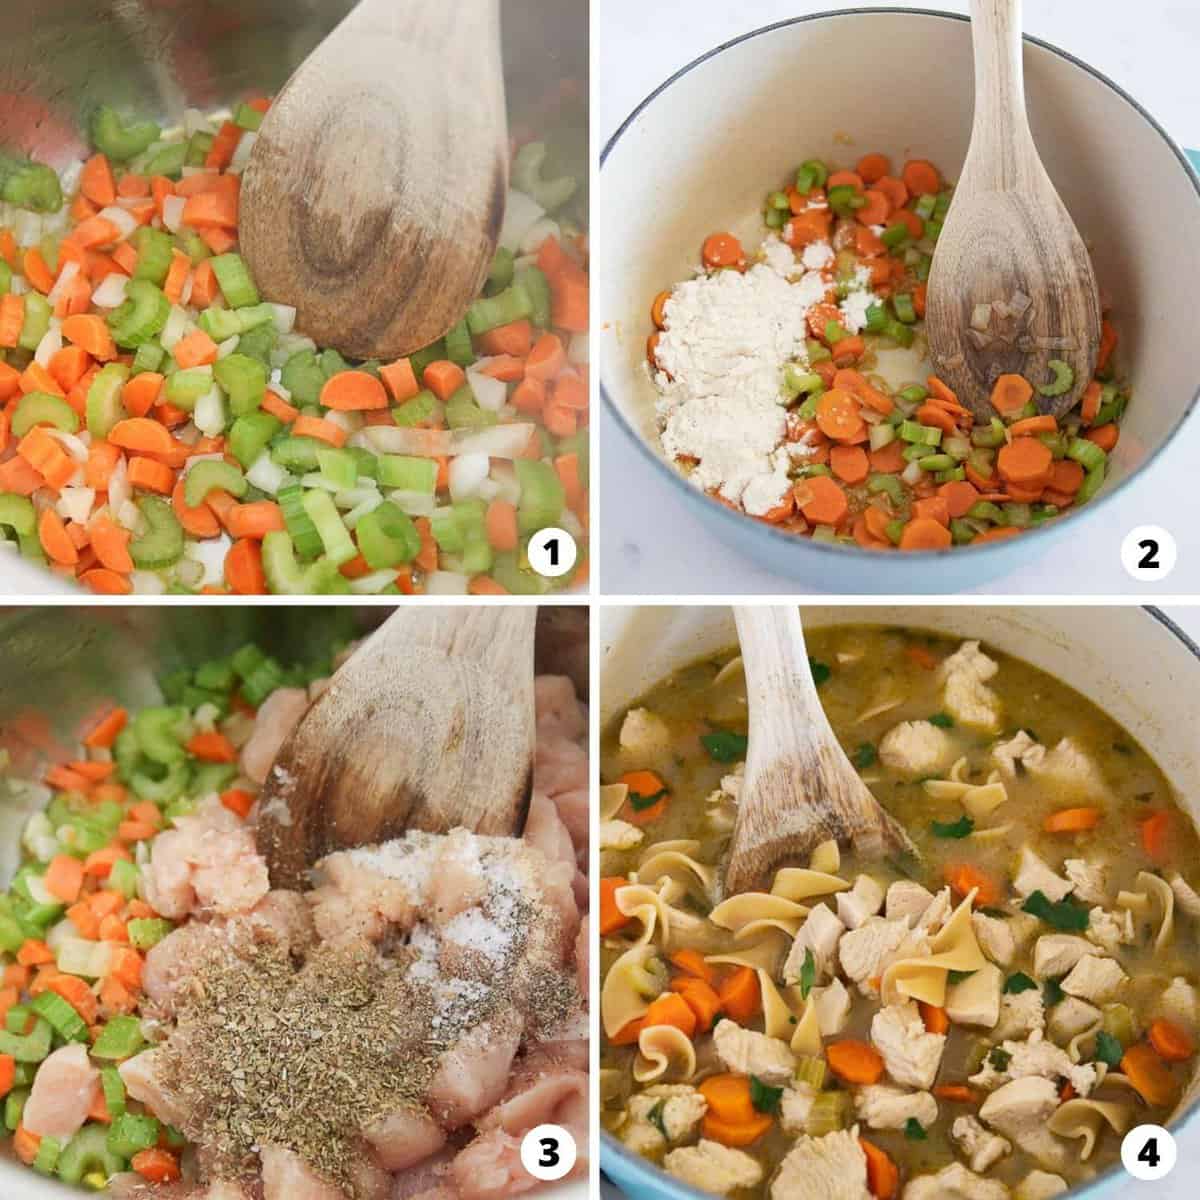 Showing how to make chicken noodle soup in a 4 step collage.